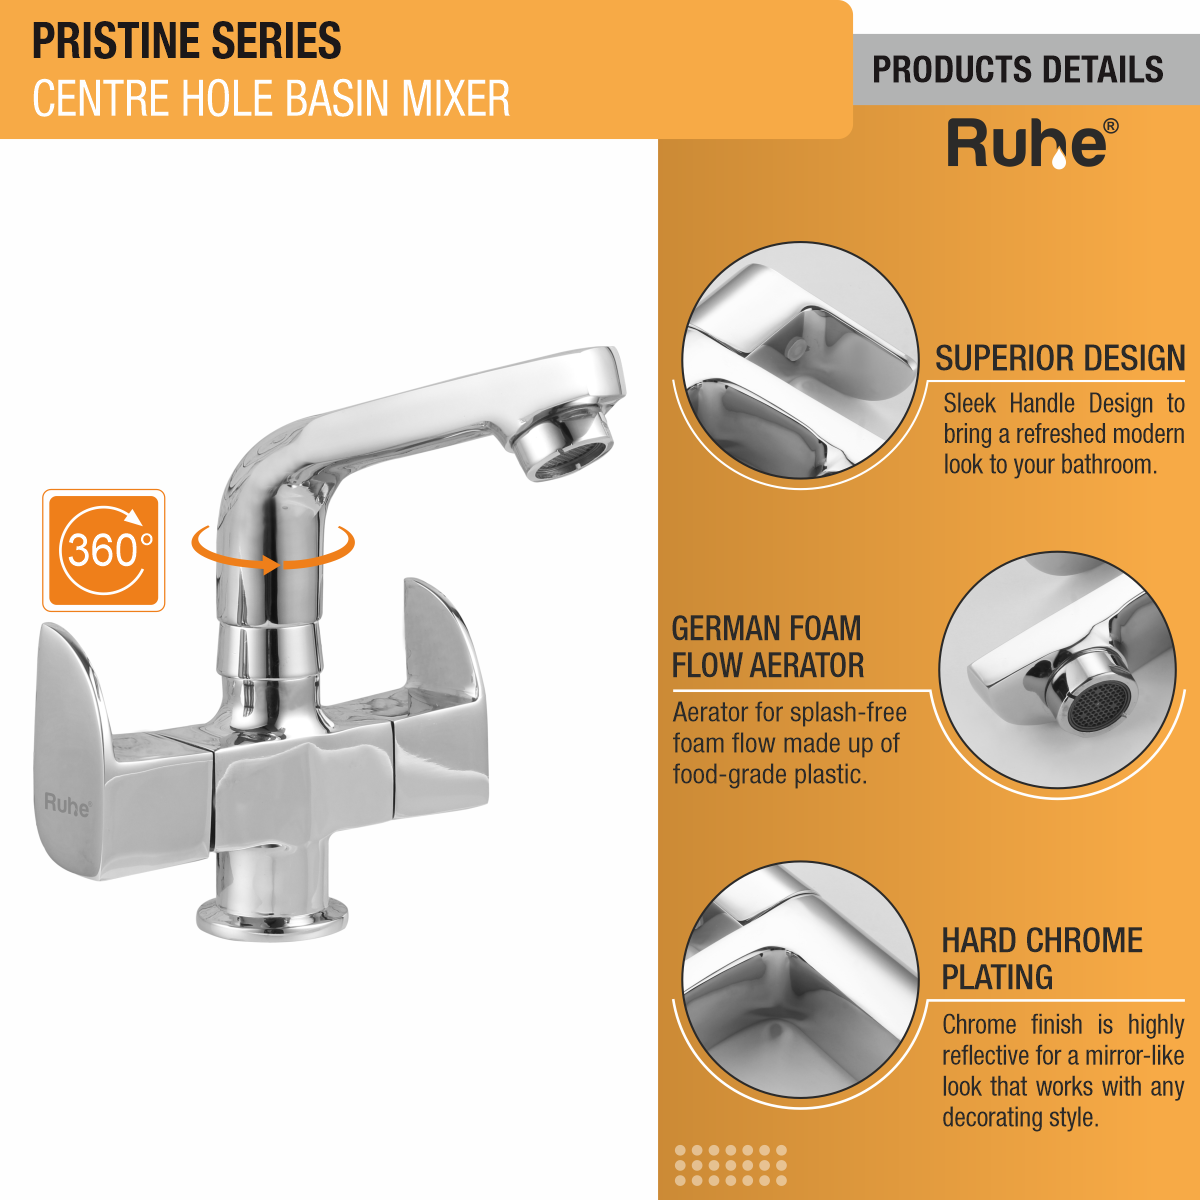 Pristine Centre Hole Basin Mixer with Small (7 inches) Swivel Spout Faucet product details